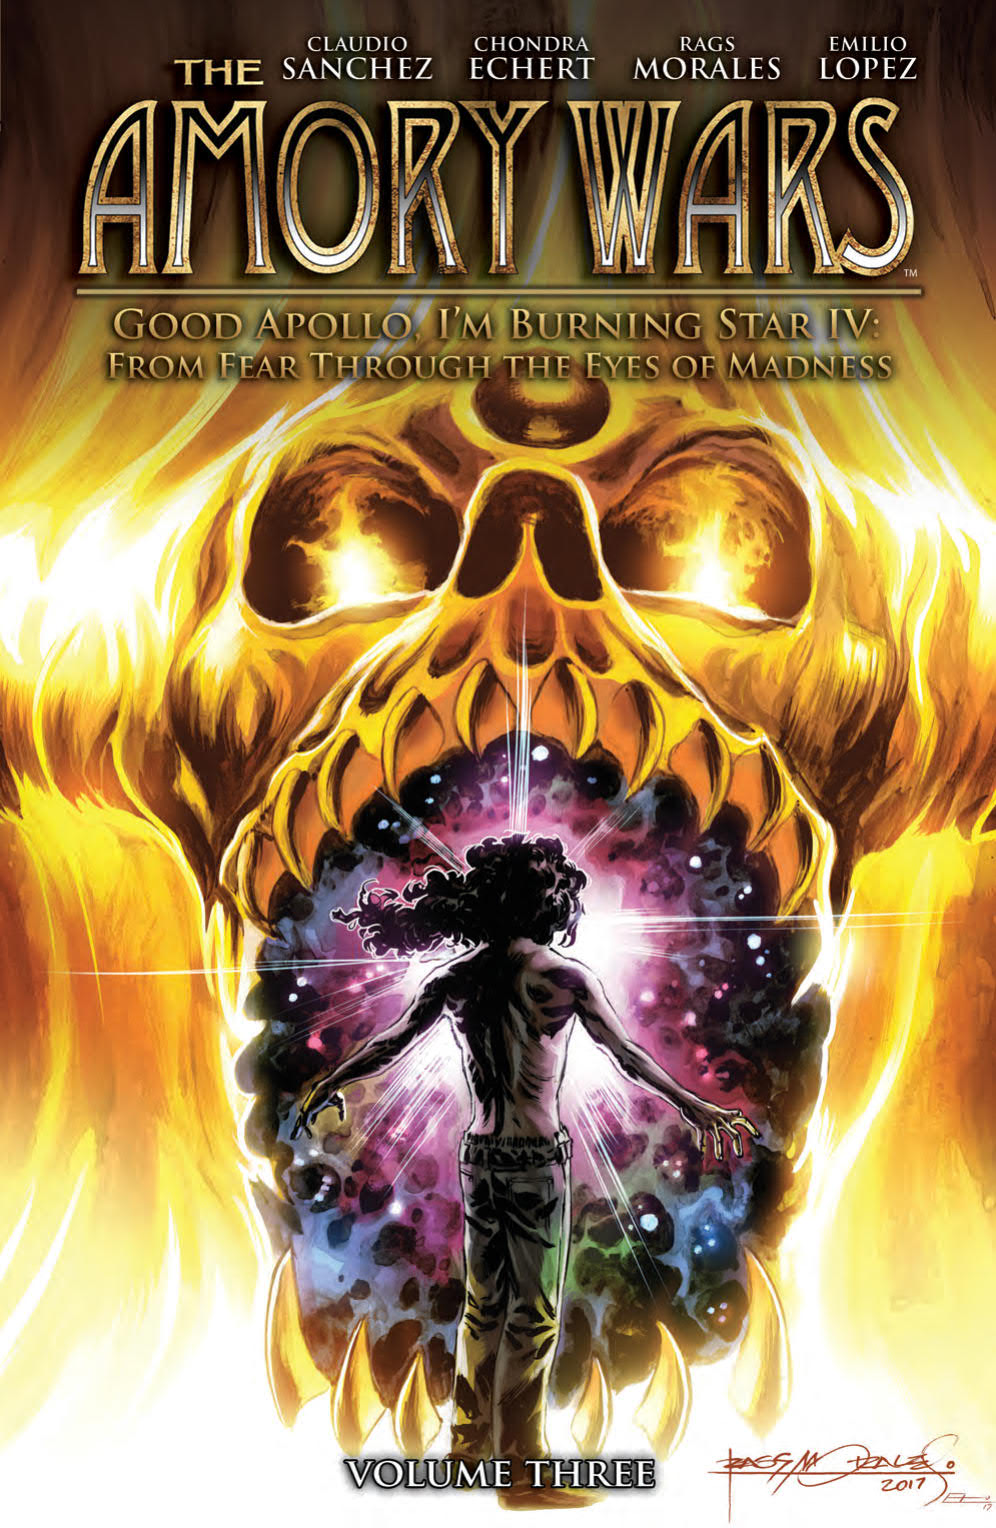 'The Amory Wars - Good Apollo, I'm Burning Star IV: From Fear Through the Eyes of Madness, Vol. 3' TPB Review